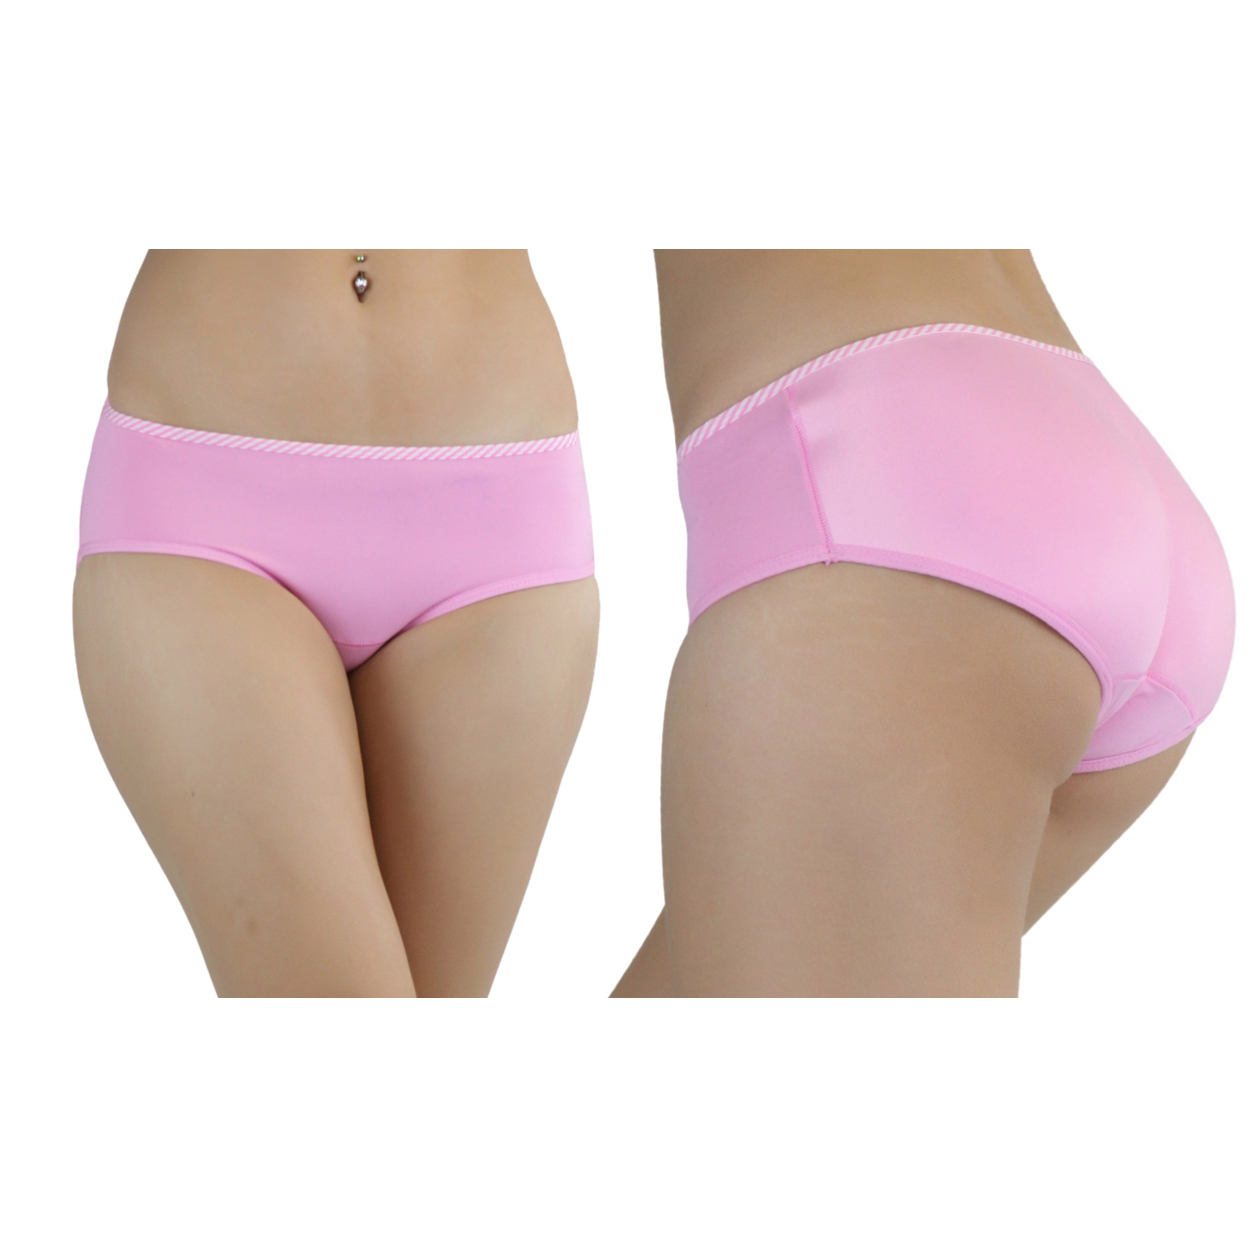 Women's Instant Booty Boosters Padded Panty - Pink, XS